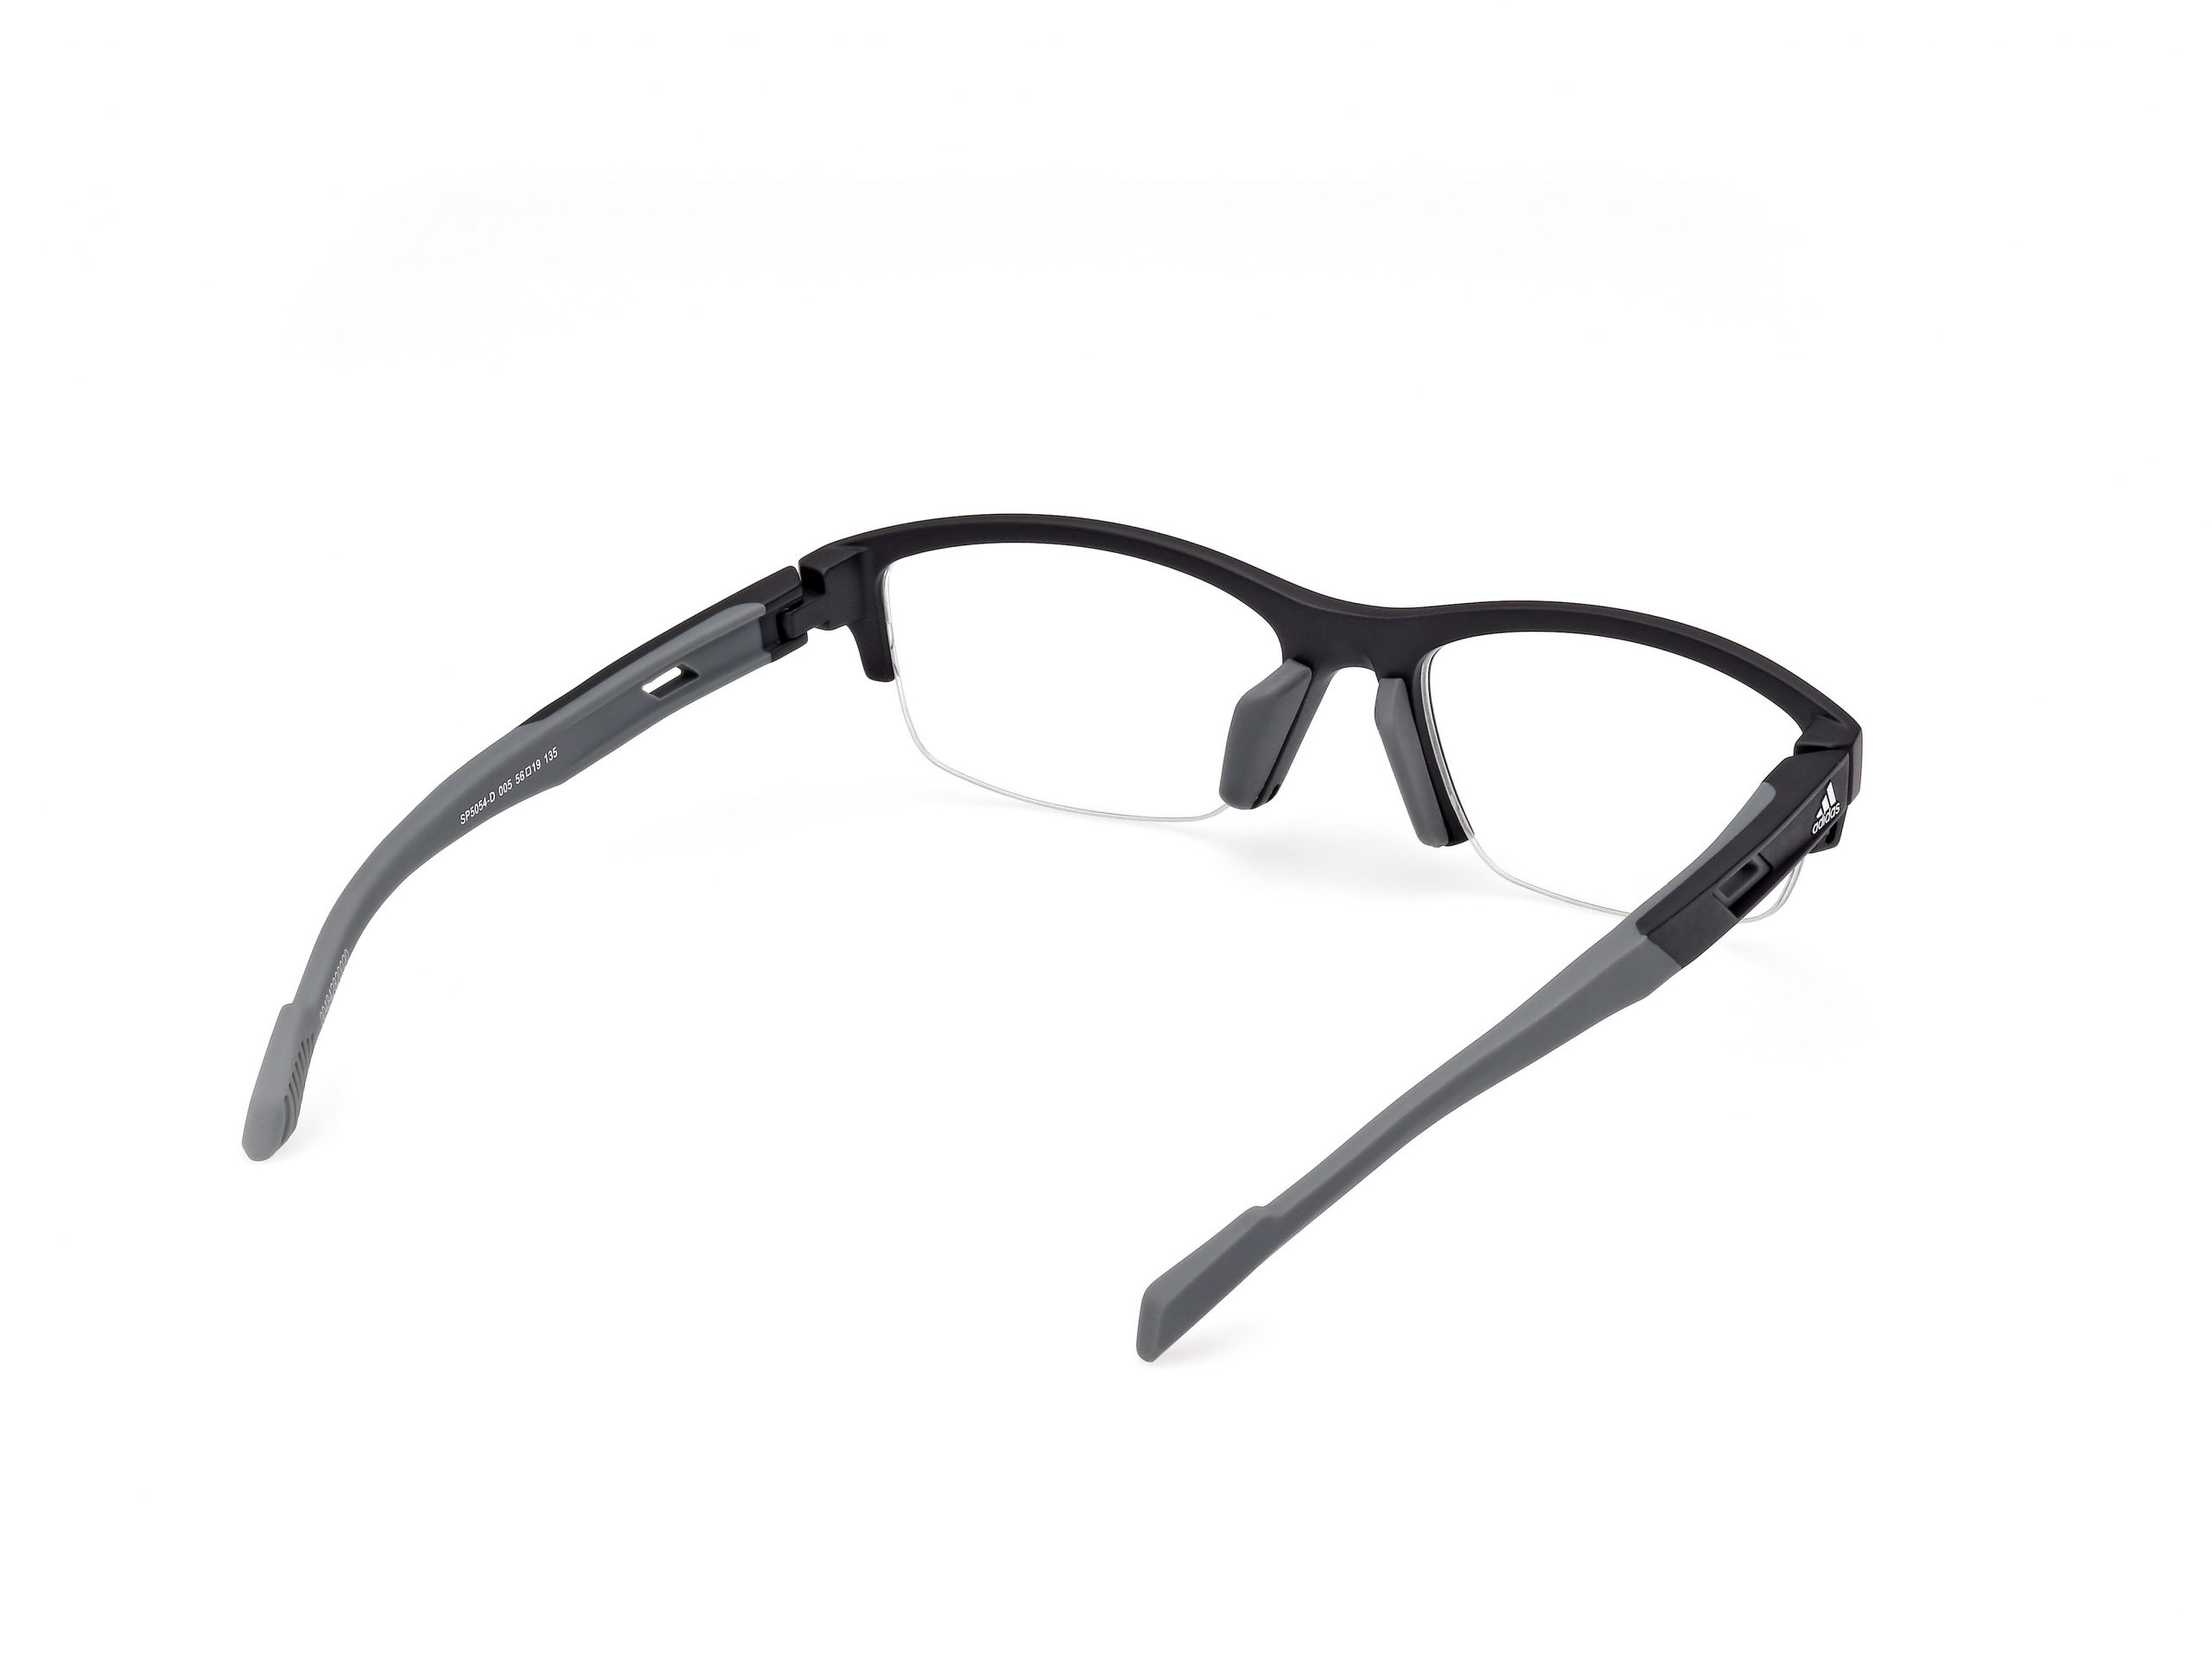 aire limpiar muestra adidas Sport Eyewear Collection - Marcolin